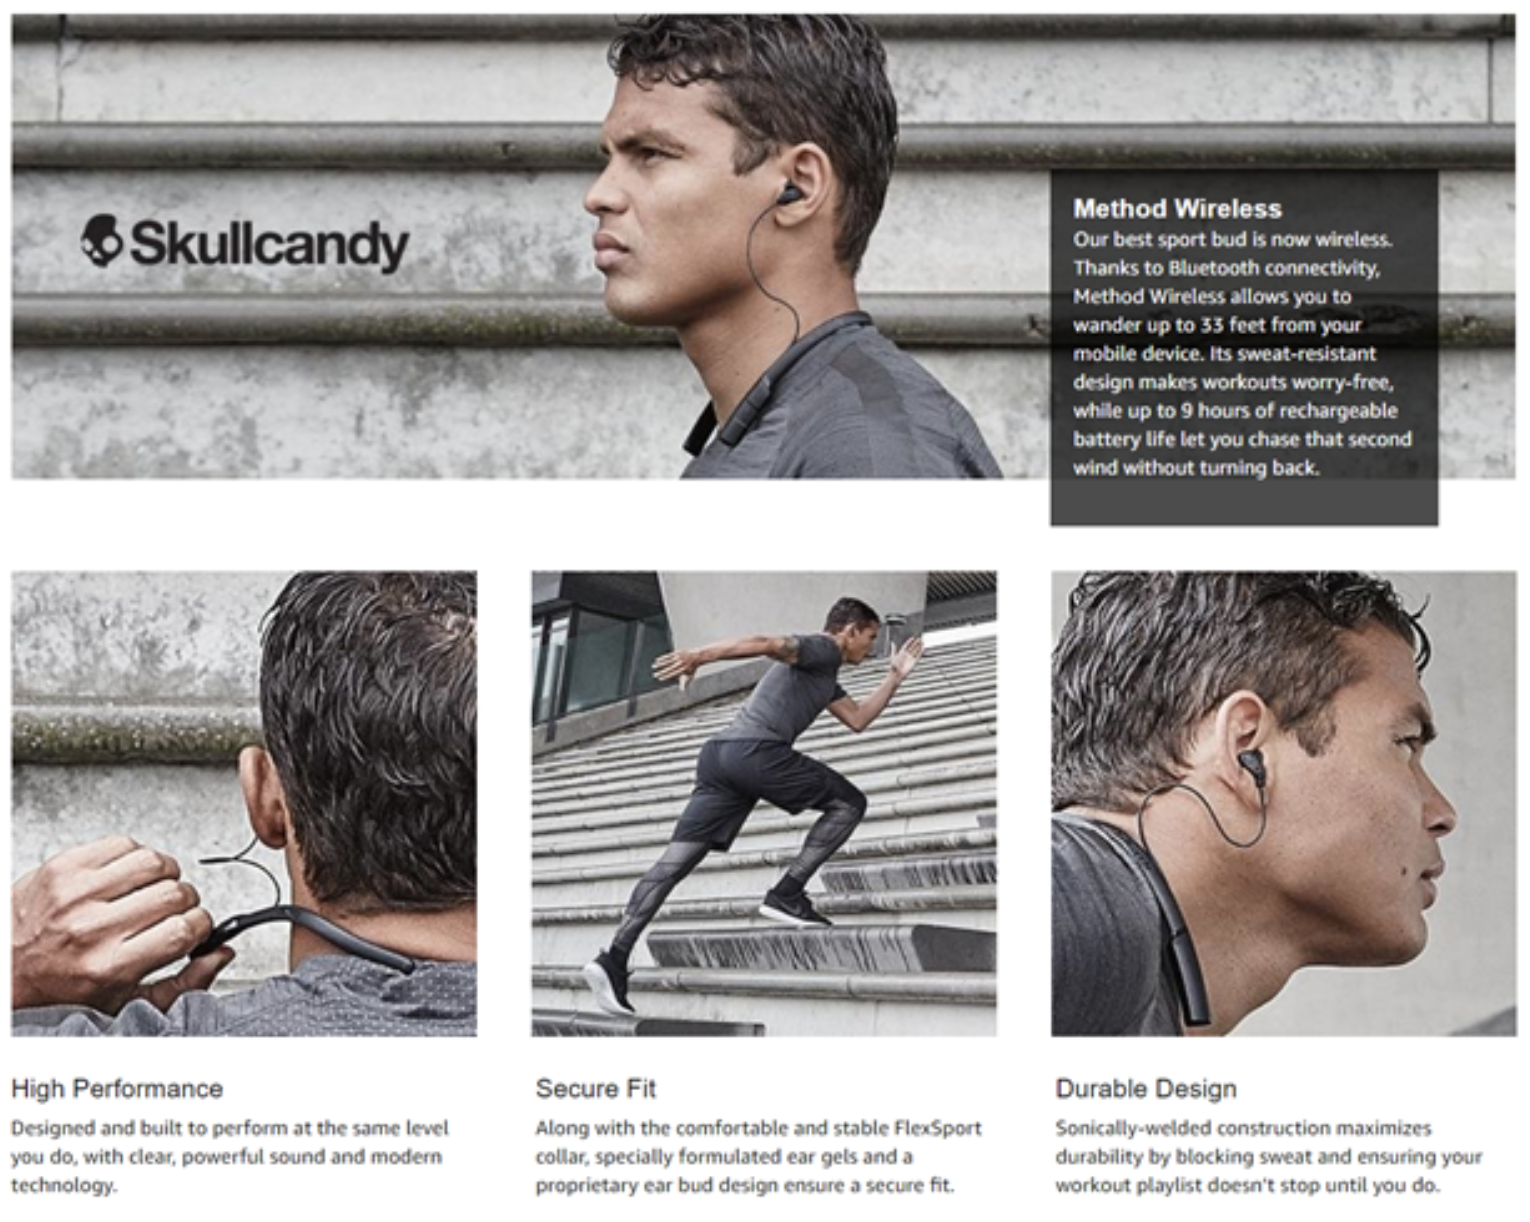 This Skullcandy Method Bluetooth Earbuds product page is visually engaging and informative at the same time